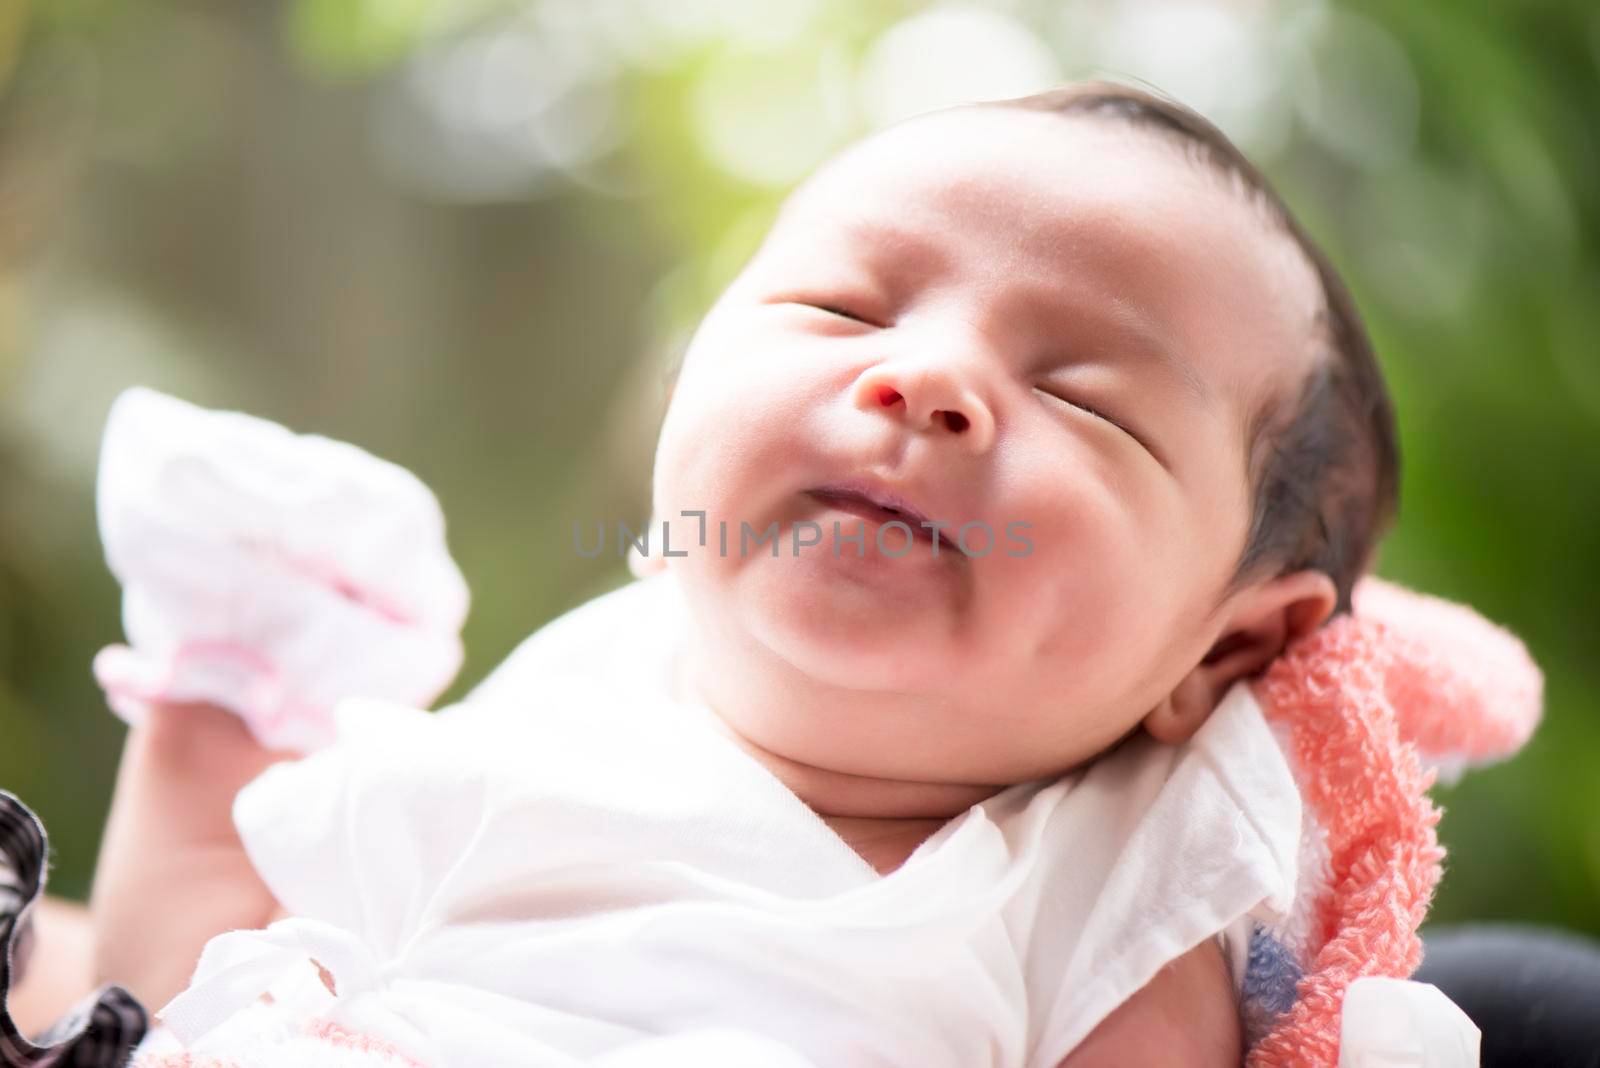 Newborn baby smiling in mother's hands, selective focus in her eyes, Family concept